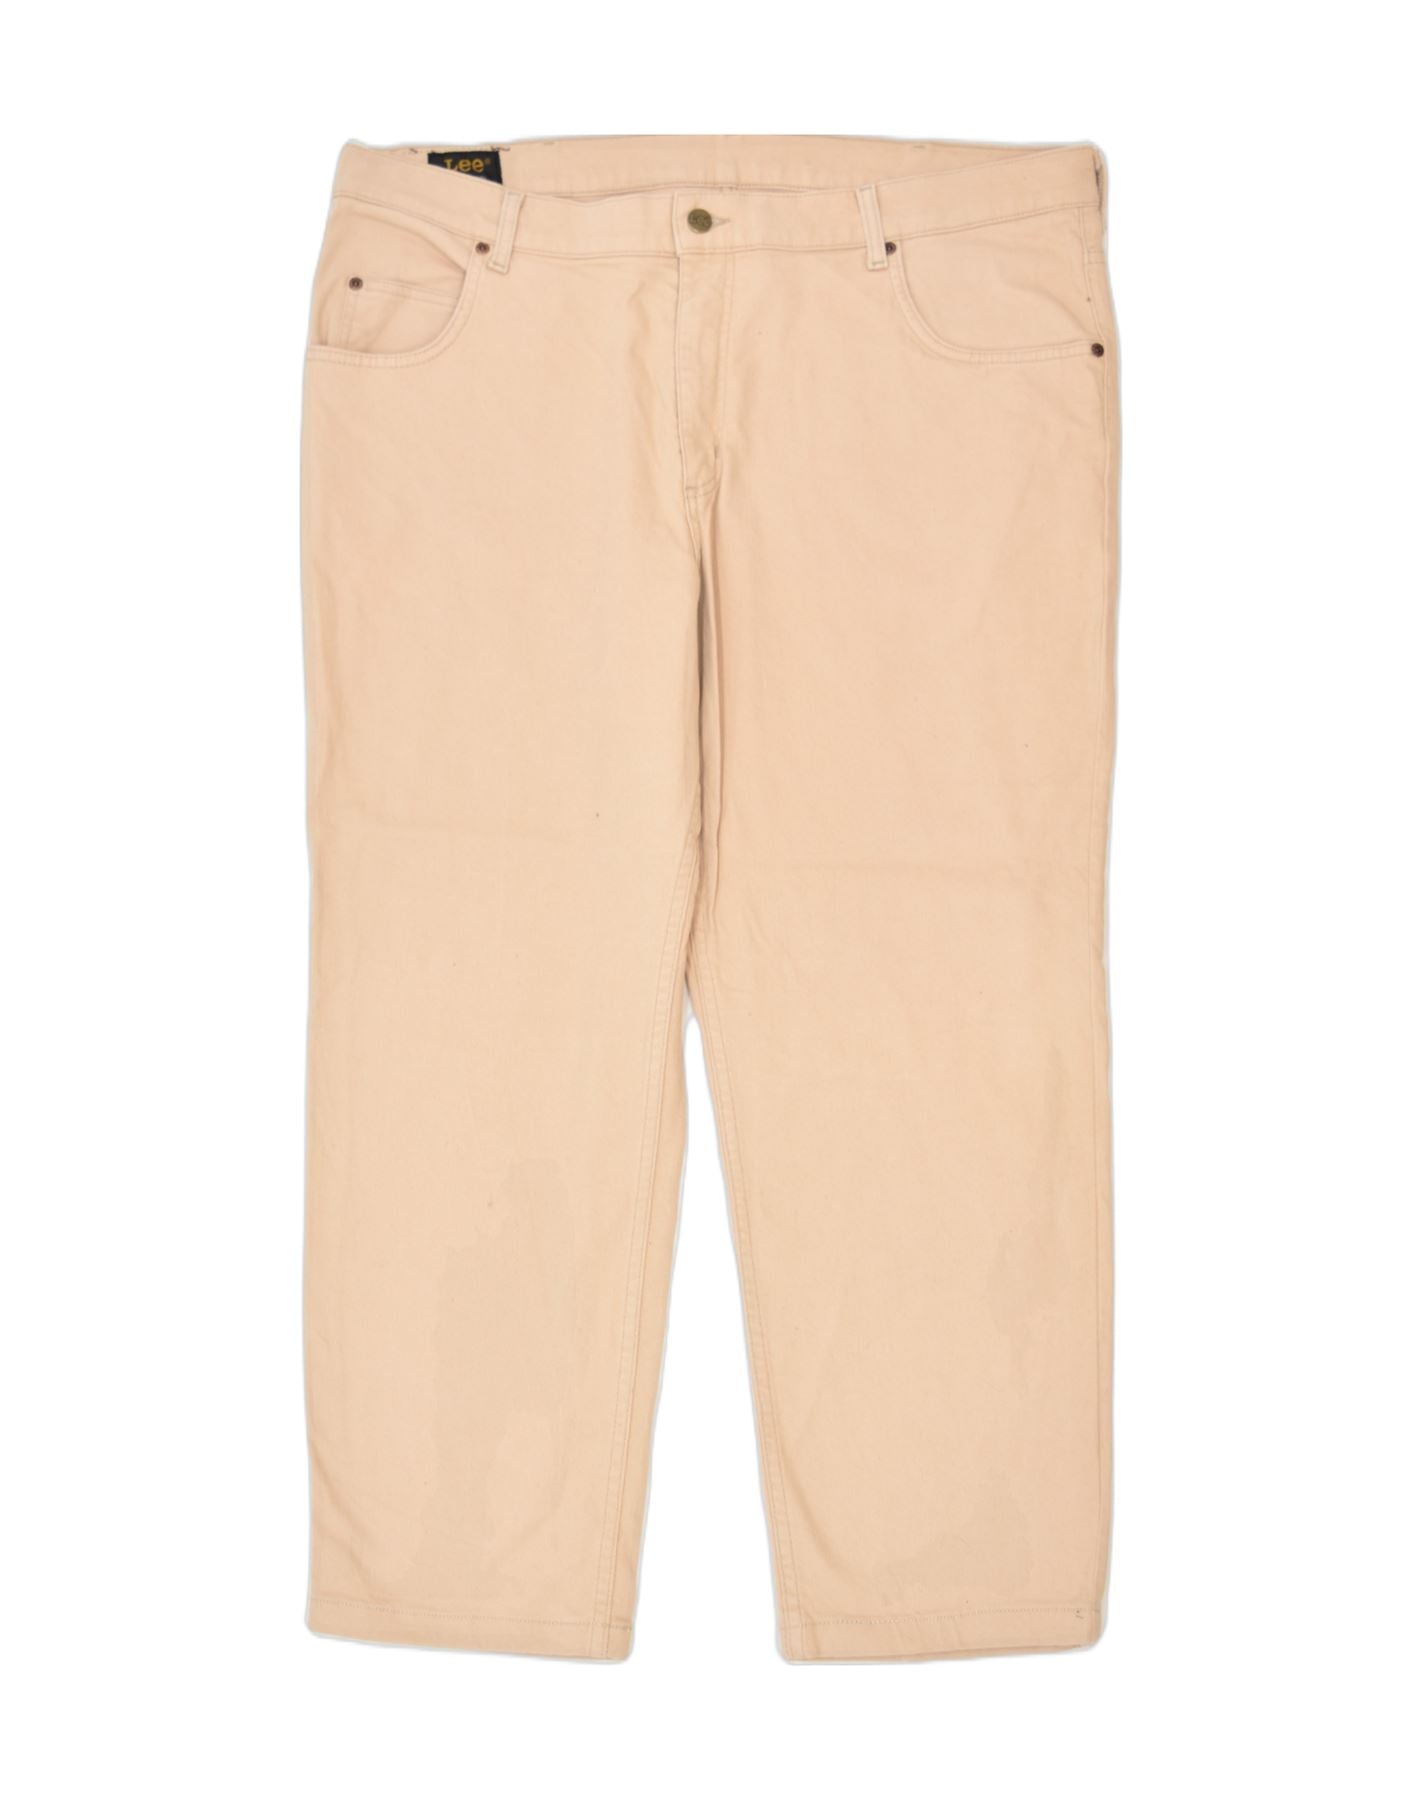 Buy Lee Boys Daren Twill Trousers from the Laura Ashley online shop